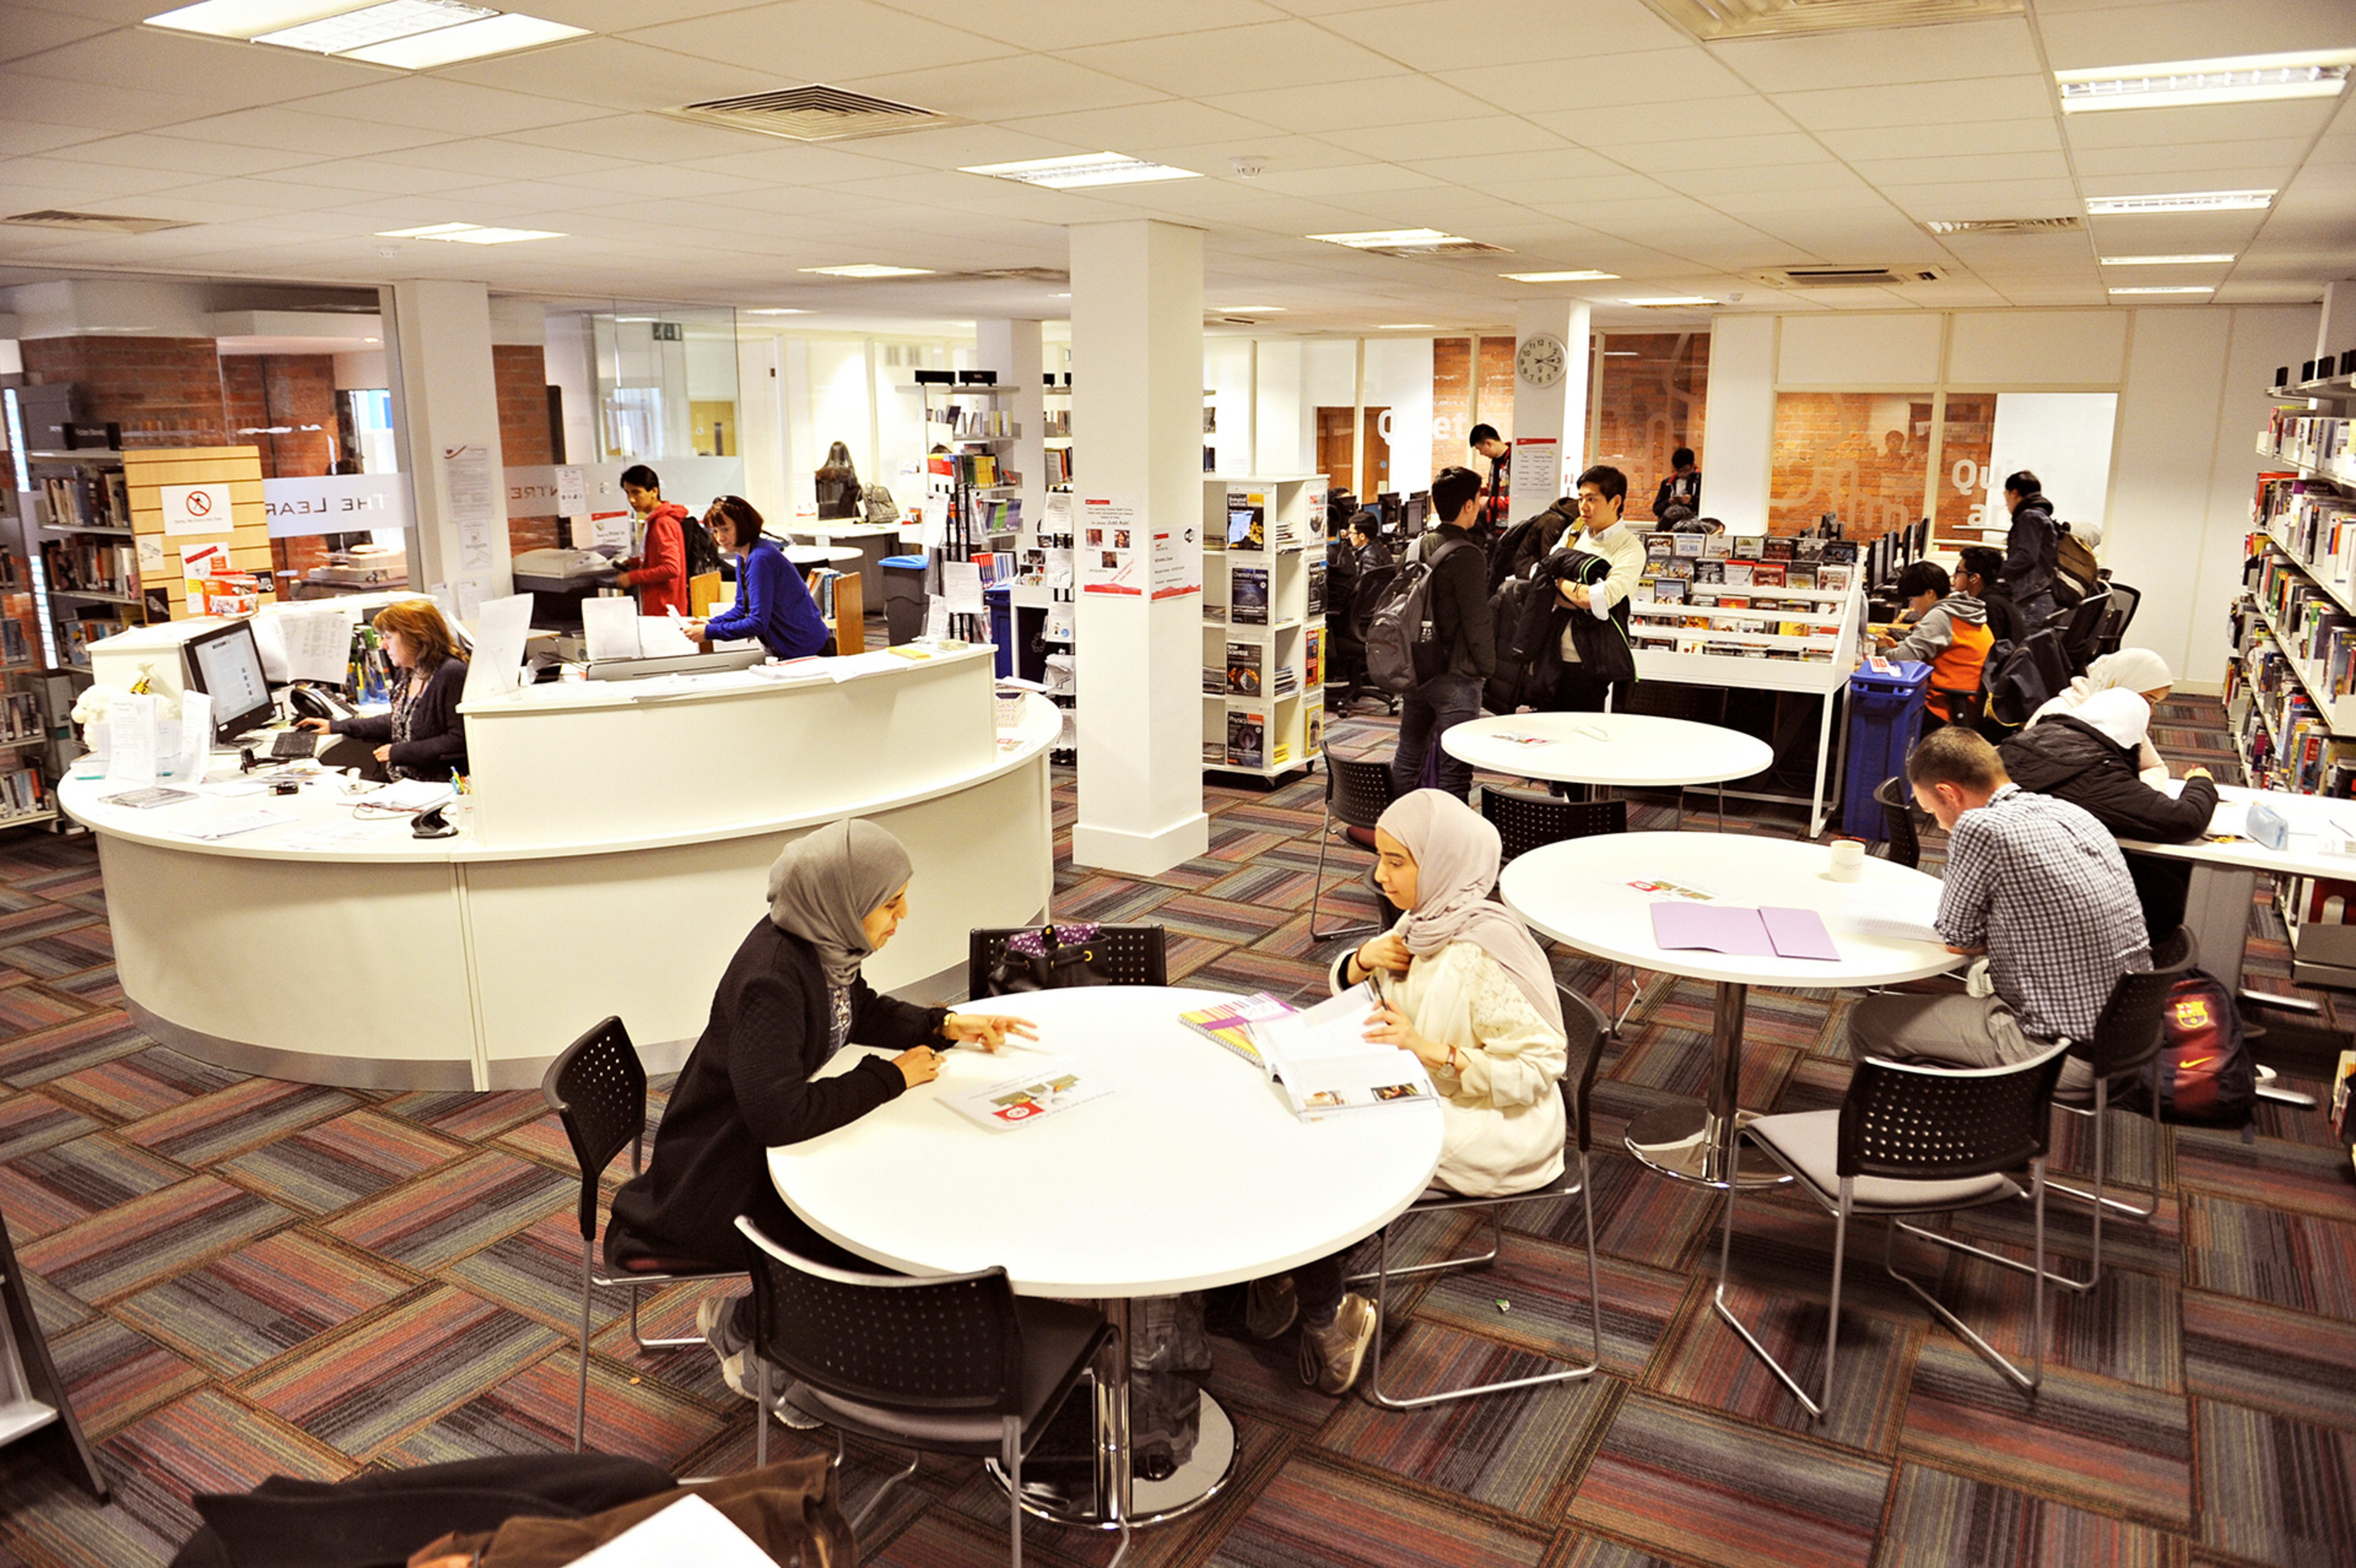 International students working in Learning Resource Centre with help desk